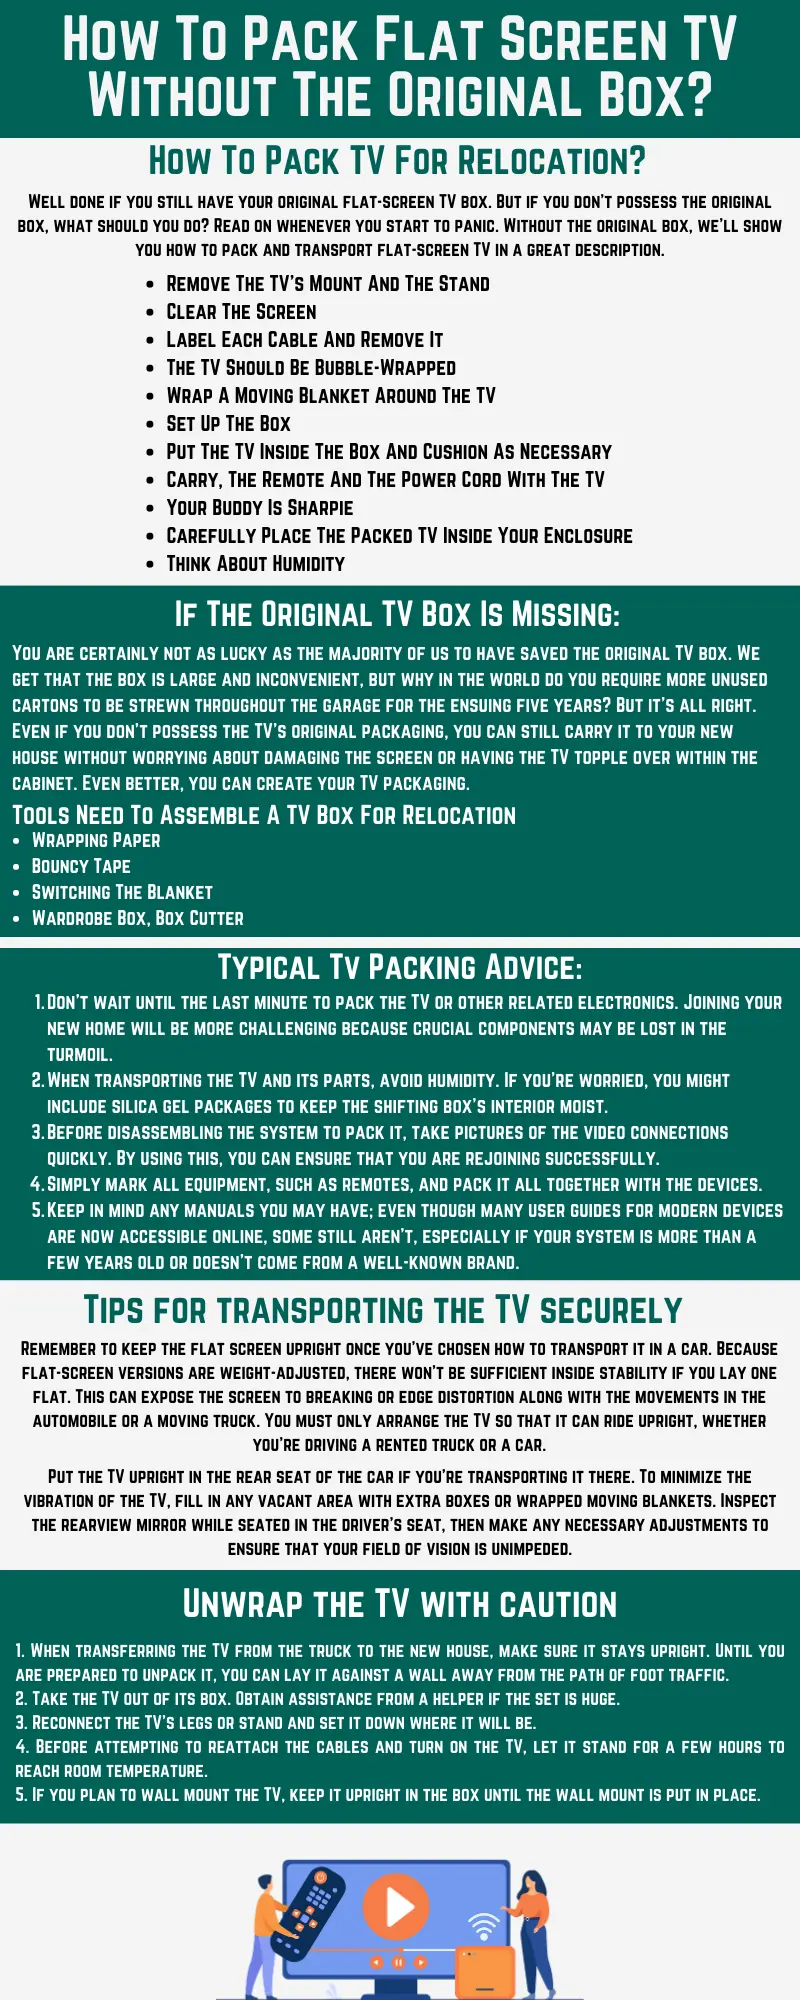 How To Pack Flat Screen TV Without The Original Box Informational Infographic